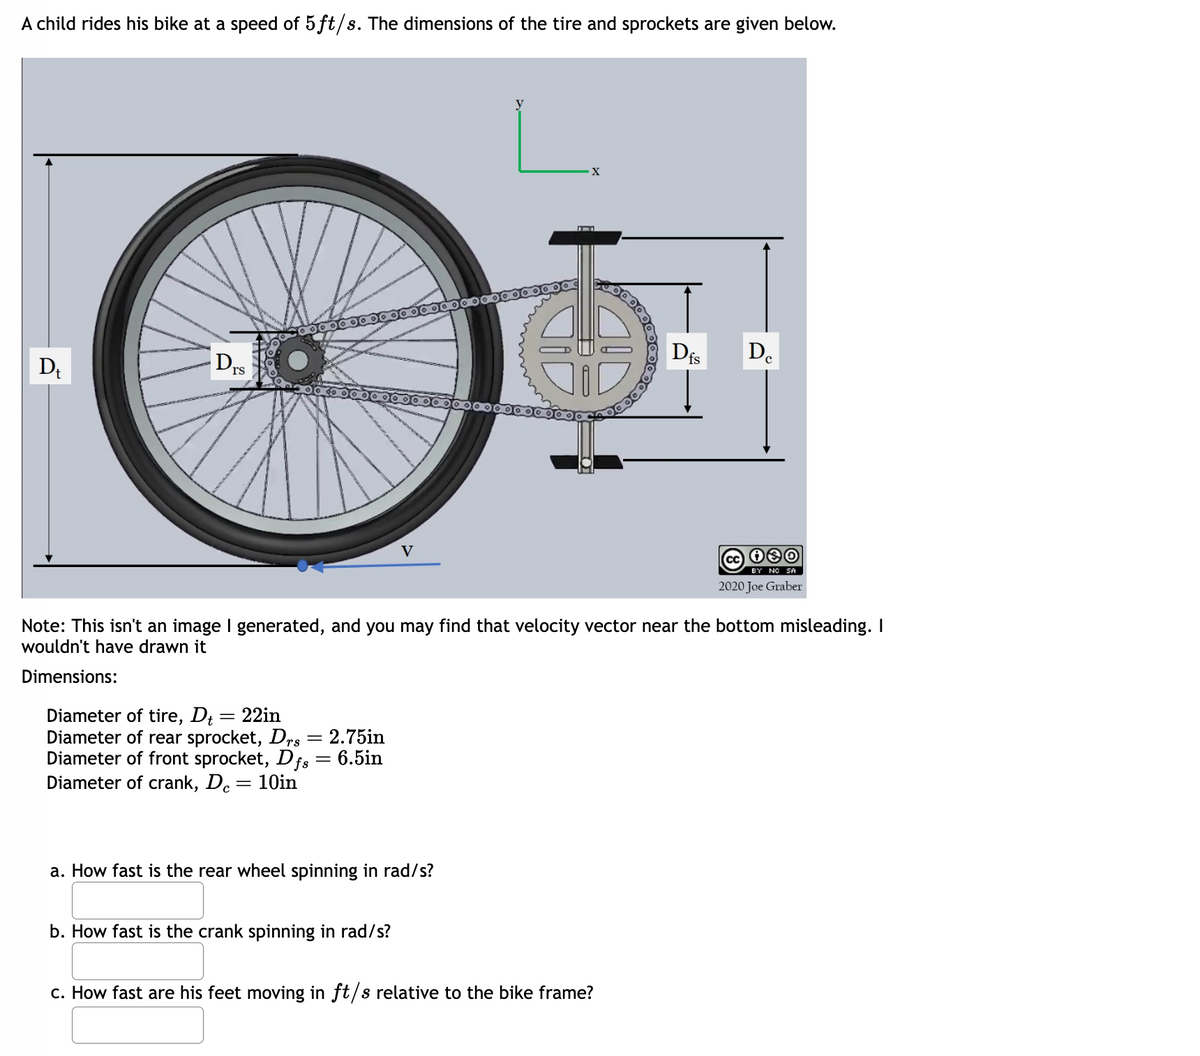 A child rides his bike at a speed of 5ft/s. The dimensions of the tire and sprockets are given below.
D₁
DIS
Diameter of tire, D₁ = 22in
Diameter of rear sprocket, Drs = 2.75in
Diameter of front sprocket, Dfs = 6.5in
Diameter of crank, Dc = 10in
V
a. How fast is the rear wheel spinning in rad/s?
b. How fast is the crank spinning in rad/s?
X
Bogo
Note: This isn't an image I generated, and you may find that velocity vector near the bottom misleading. I
wouldn't have drawn it
Dimensions:
c. How fast are his feet moving in ft/s relative to the bike frame?
Dfs
De
BY NO SA
2020 Joe Graber